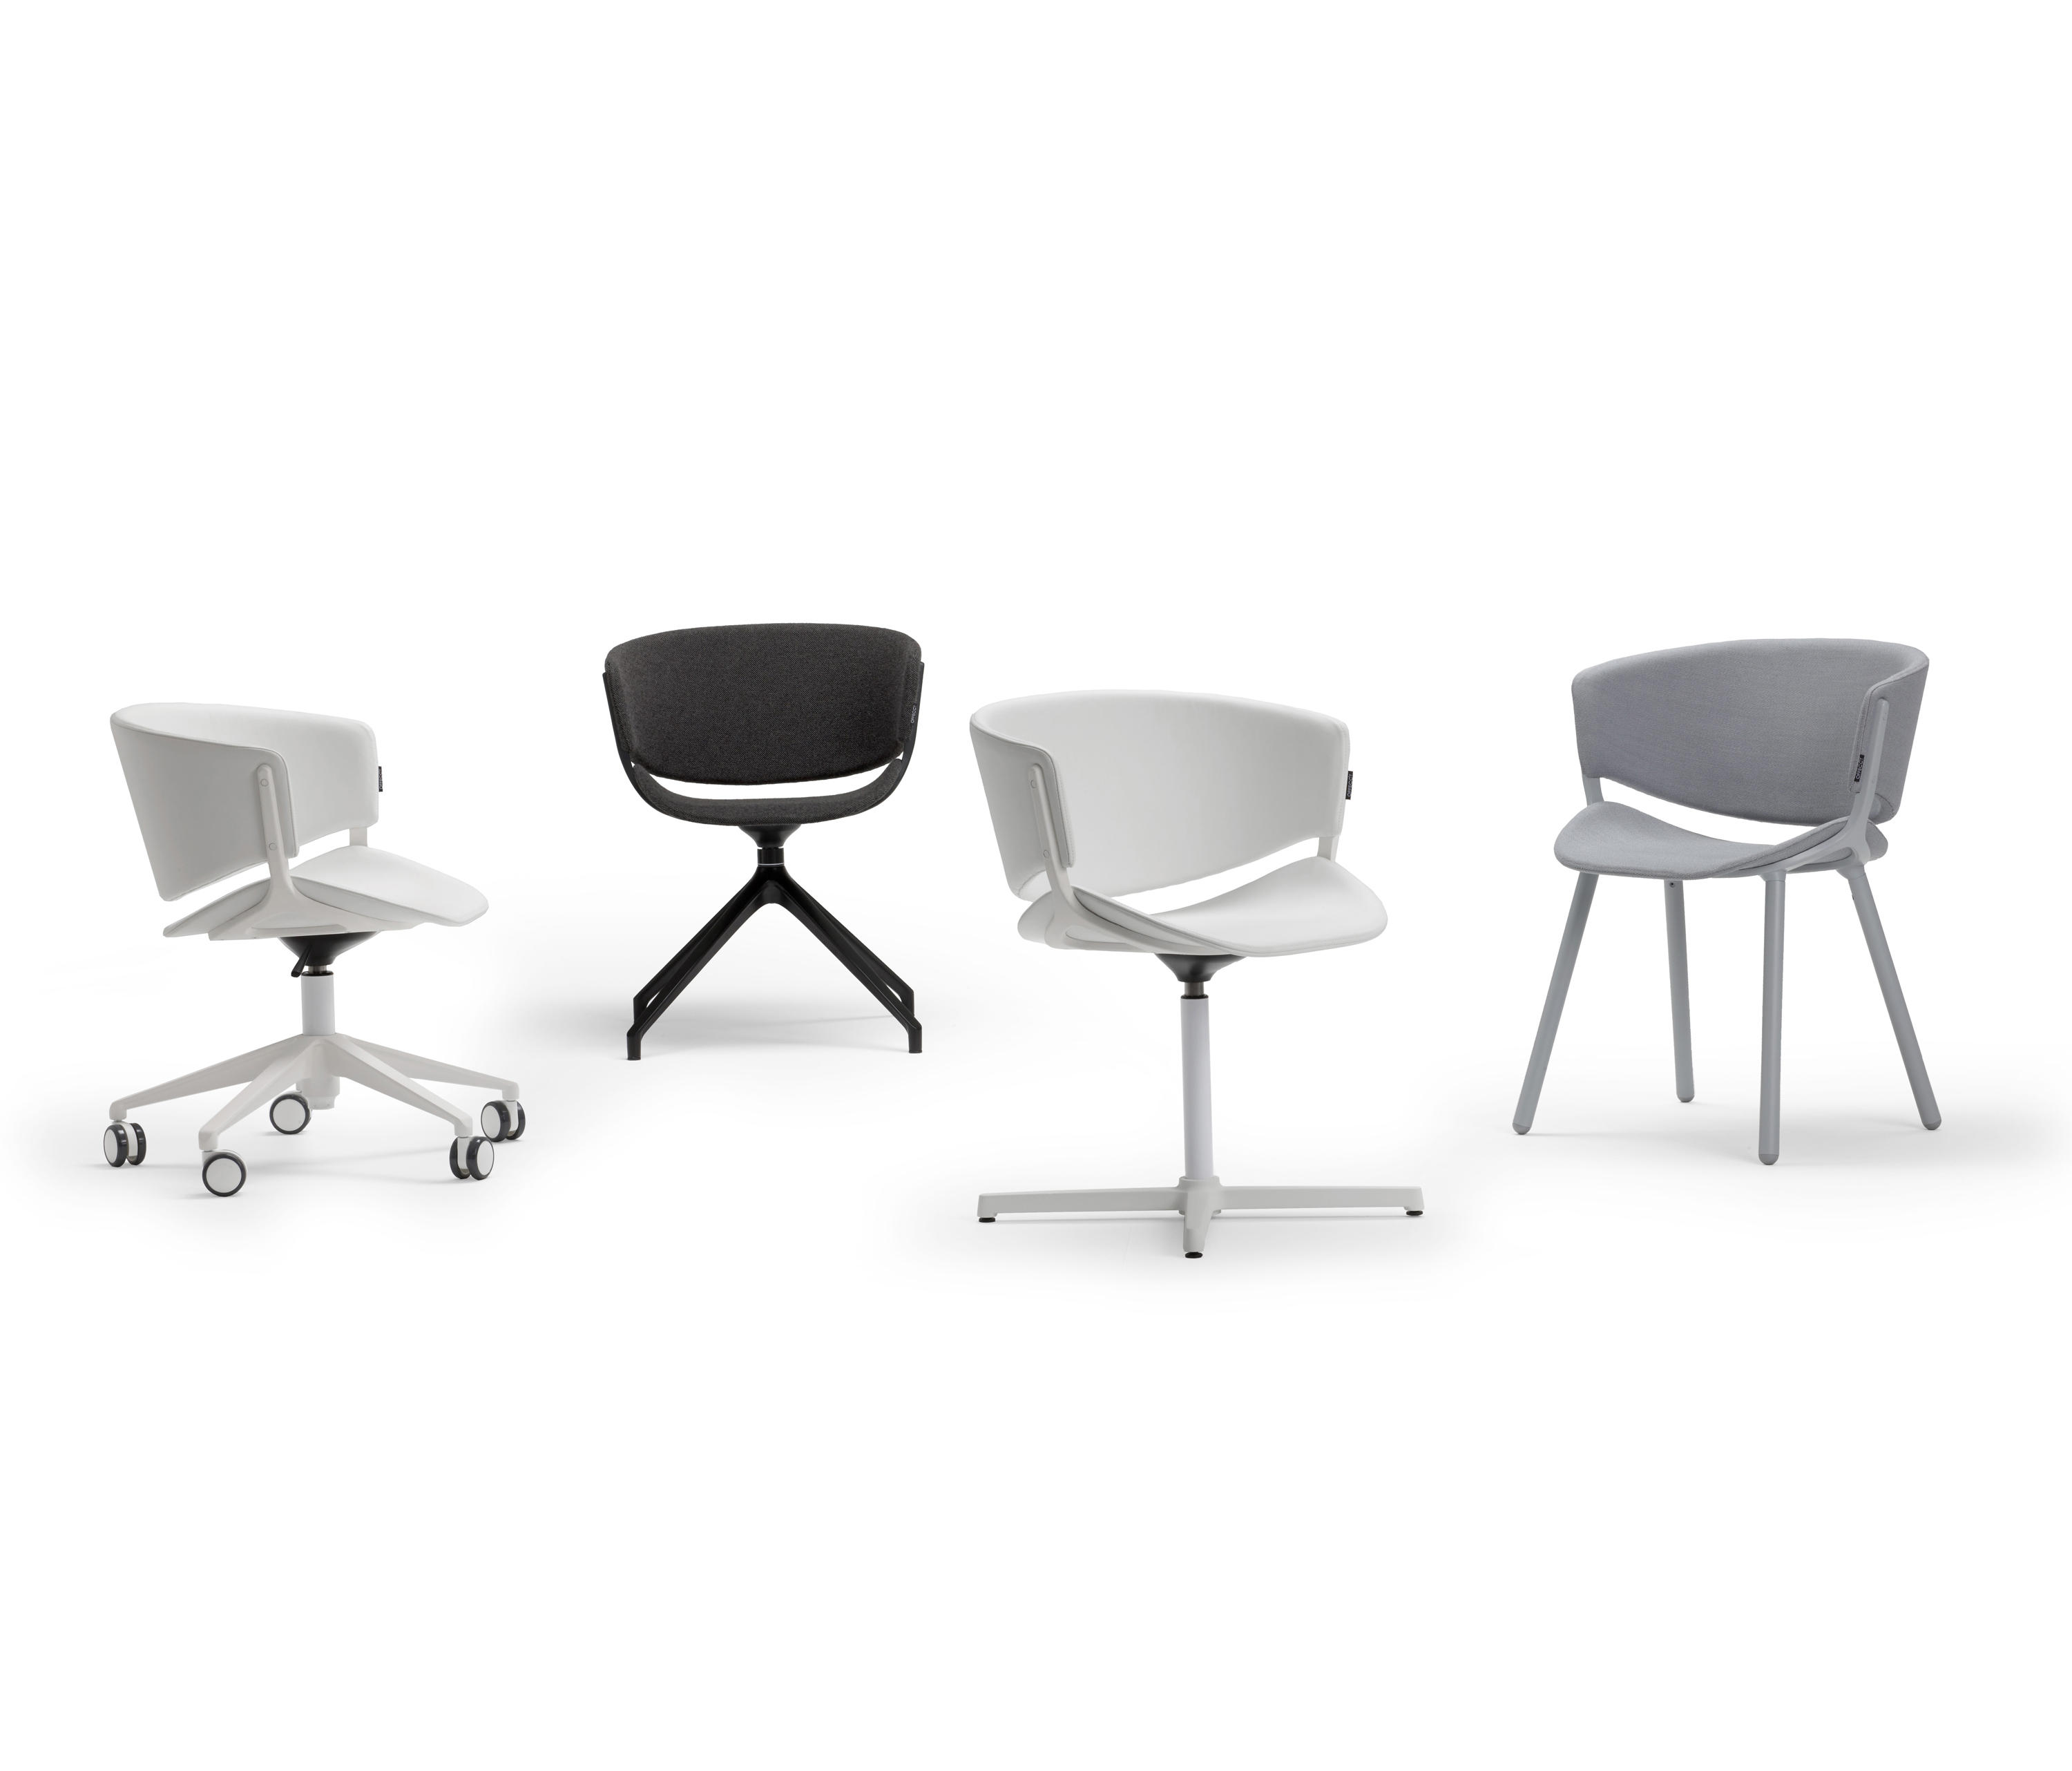 Phoenix Chairs by Luca Nichetto for Offecct